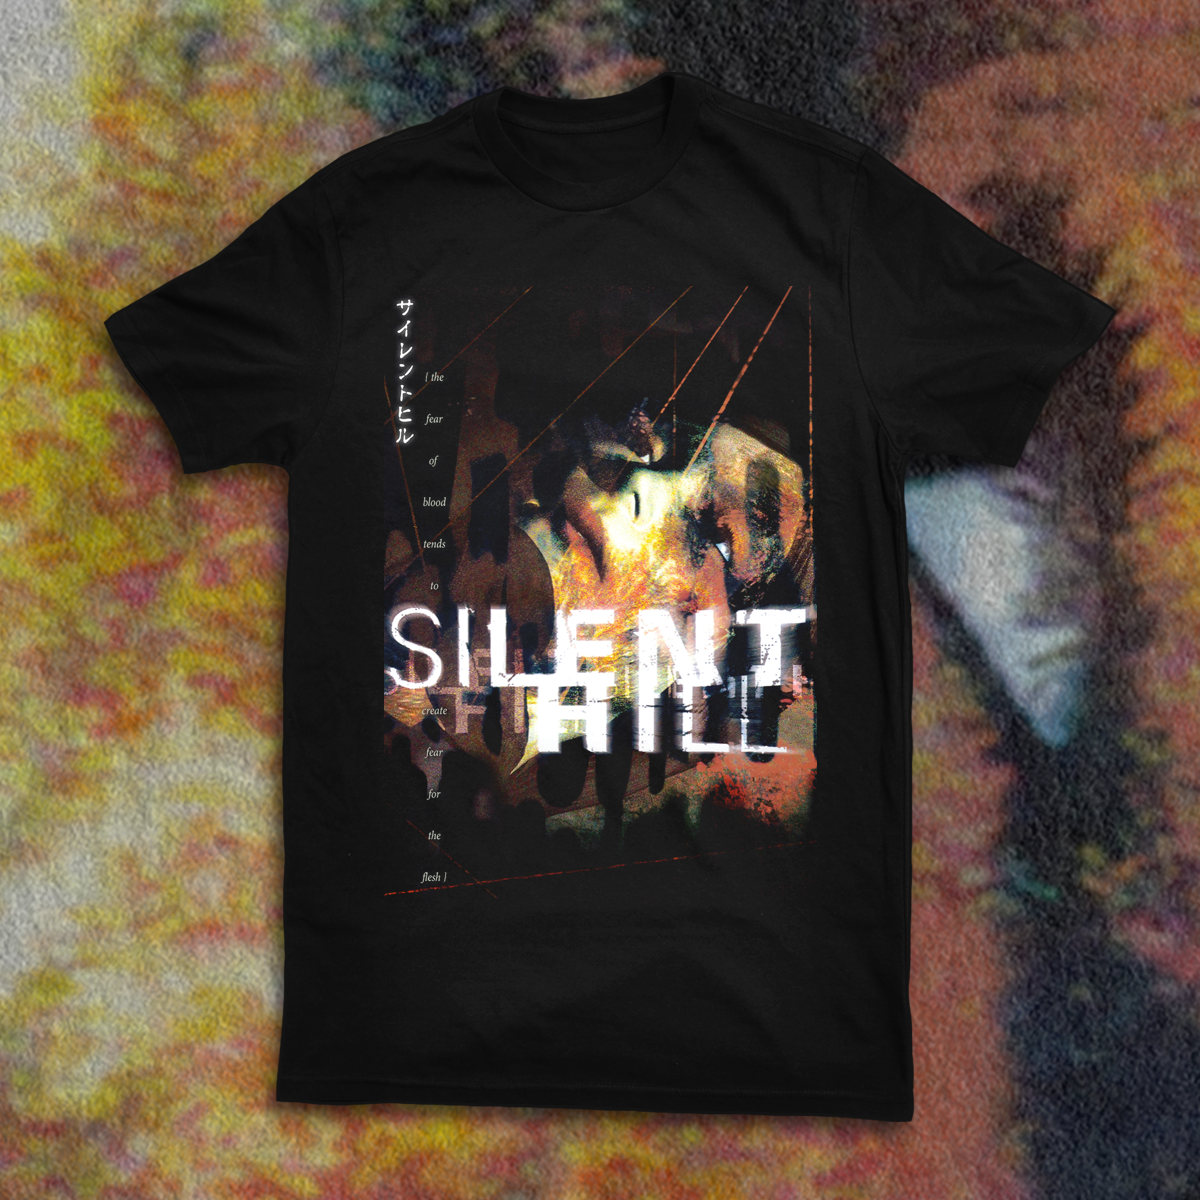 Silent Hill 2 Classic Gildan Shirt, Occult, Cult, and Obscure Clothing and  Tshirts